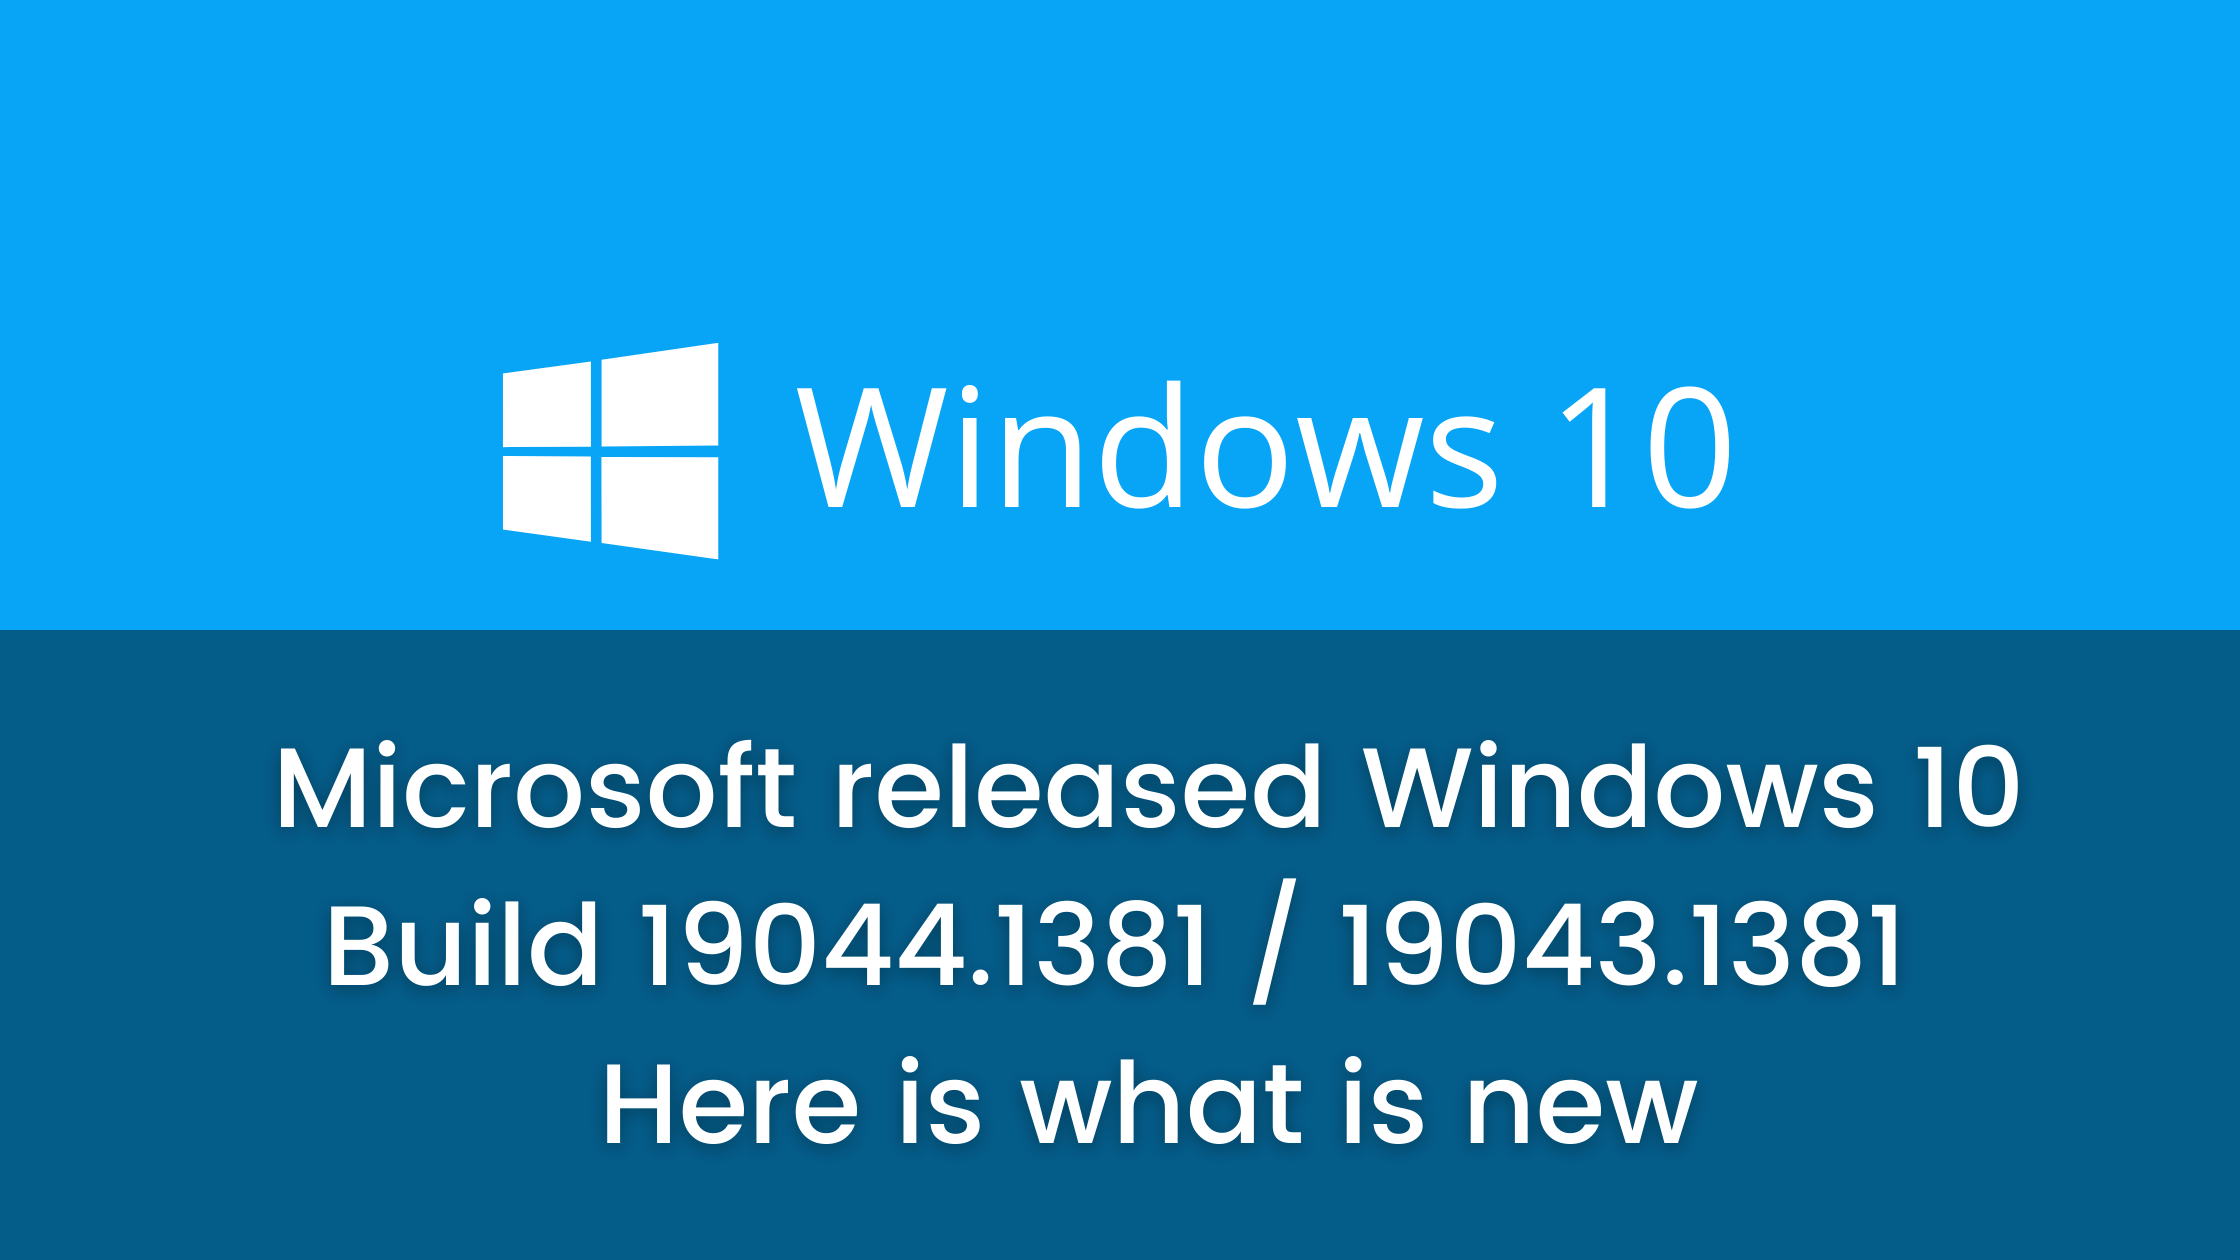 Microsoft released Windows 10 Build 19044.1381 19043.1381 Here is what is new